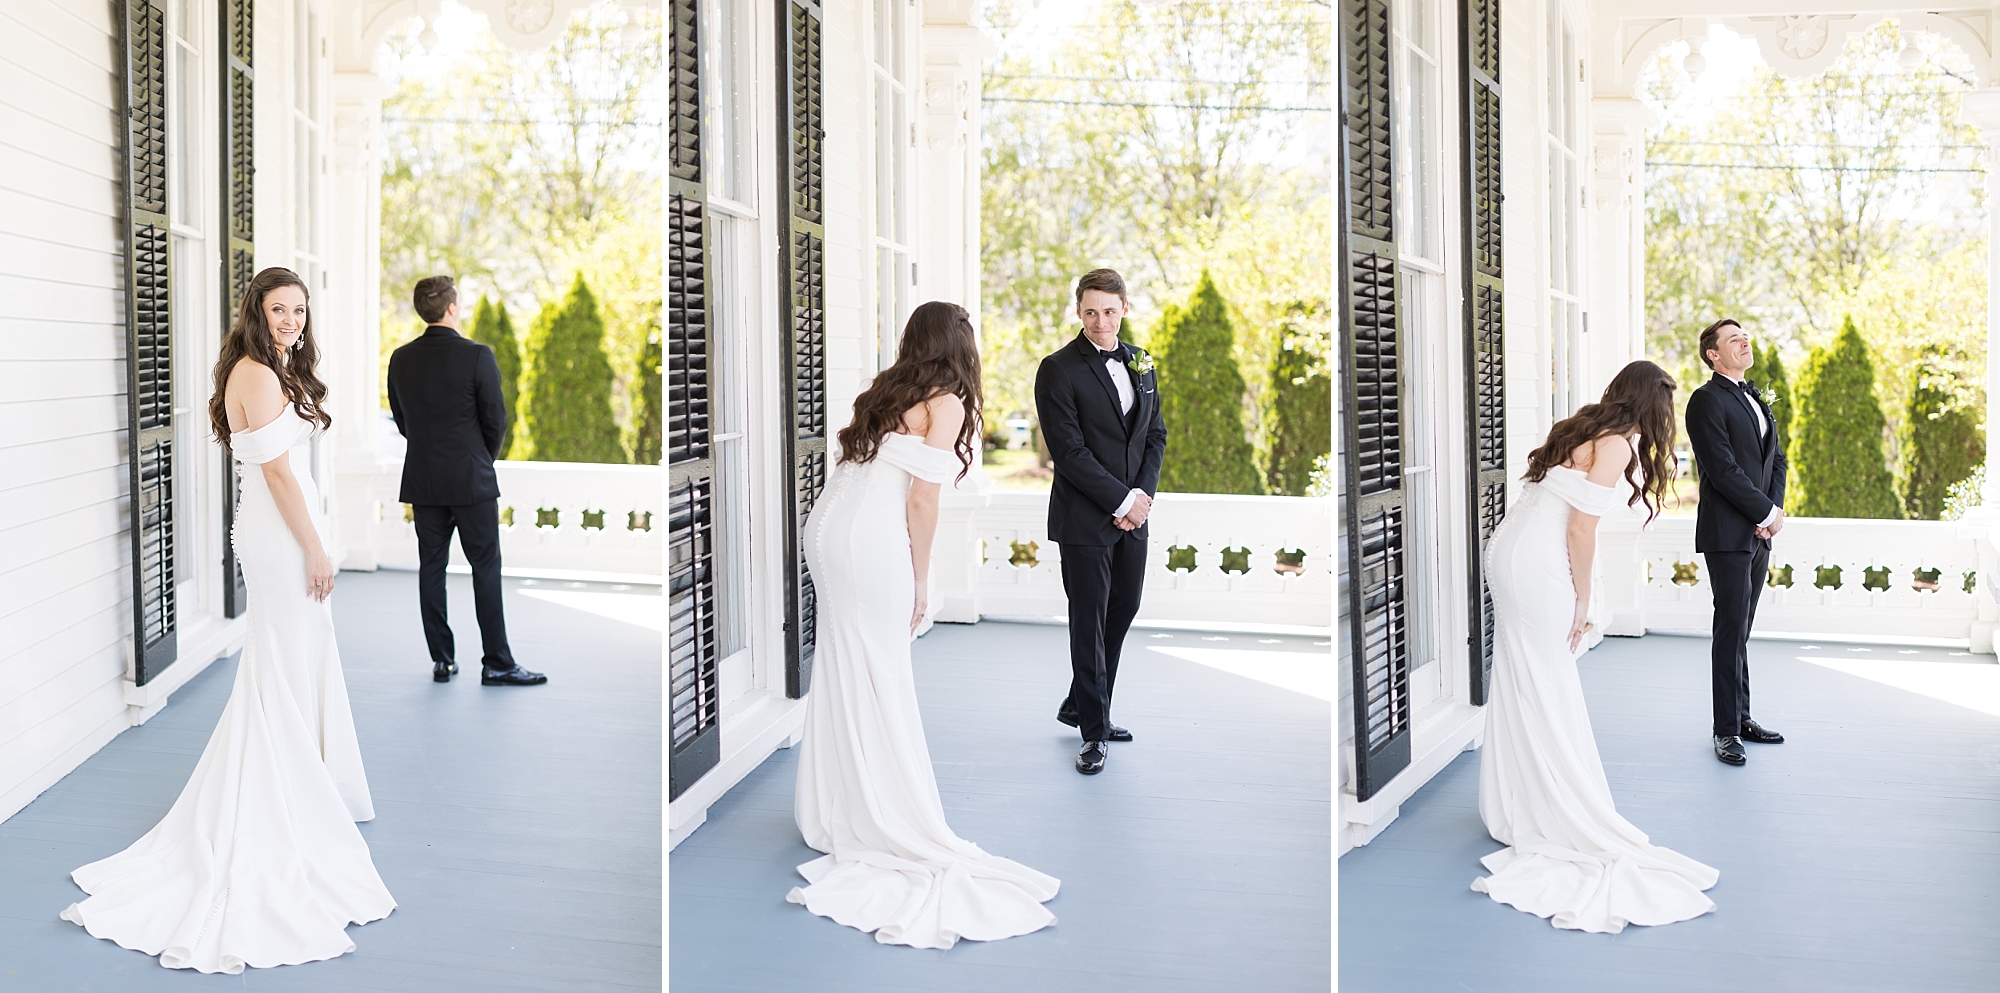 The groom sees his bride for the first time | Merrimon Wynne Wedding | Sarah Hinckley Photography | Raleigh NC Wedding Photographer